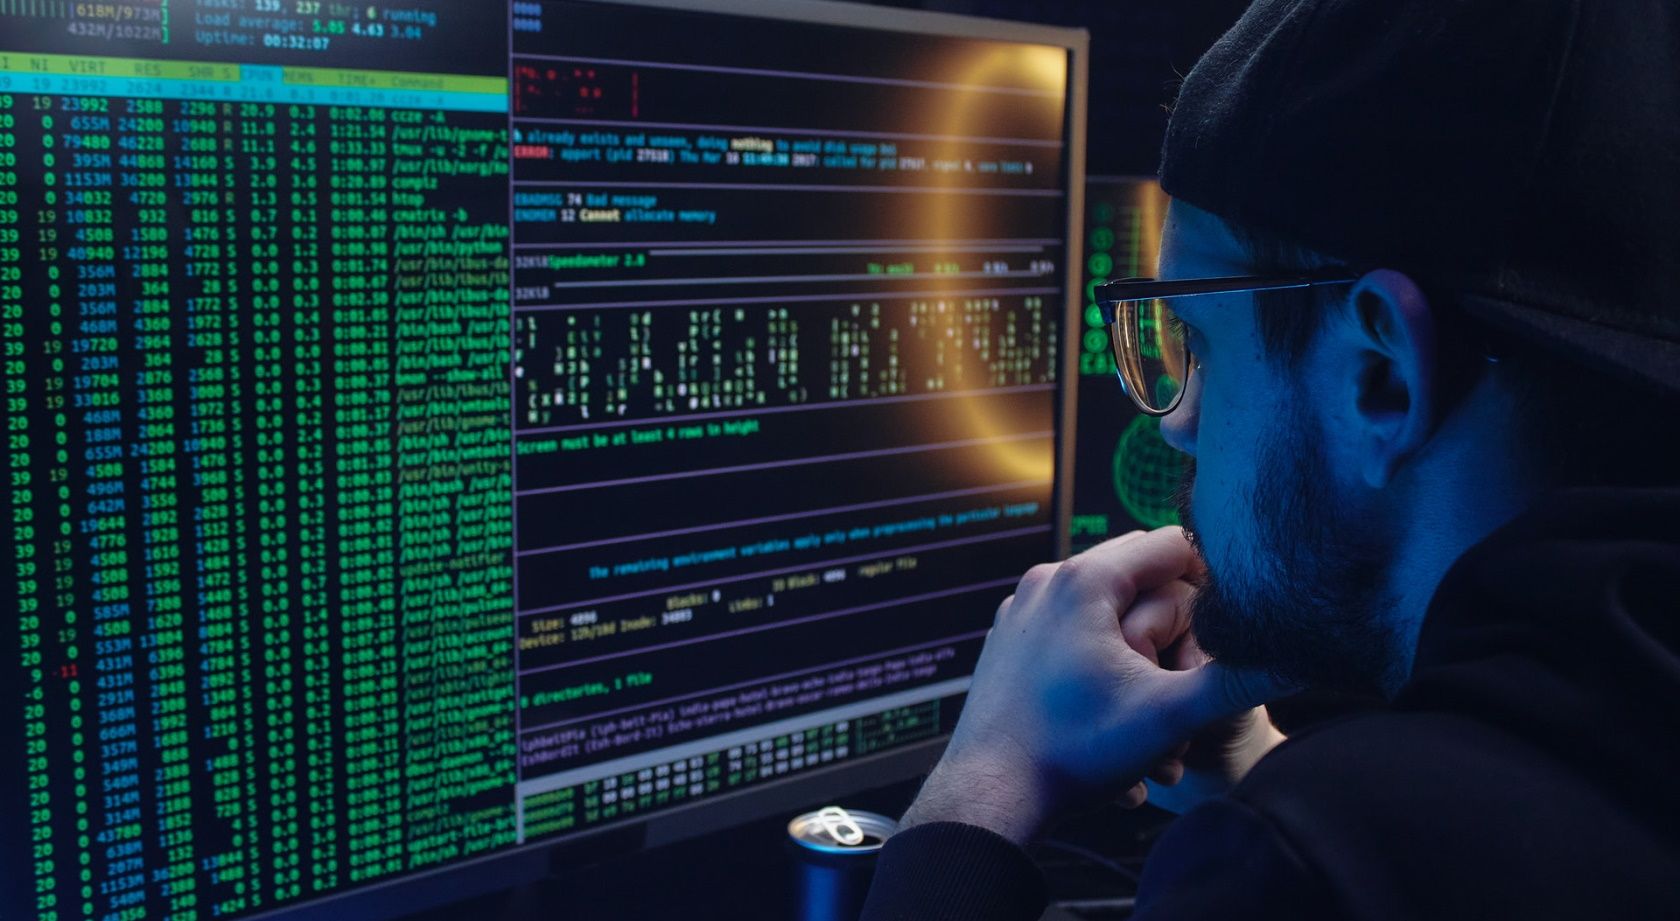 Hacker in front of a computer